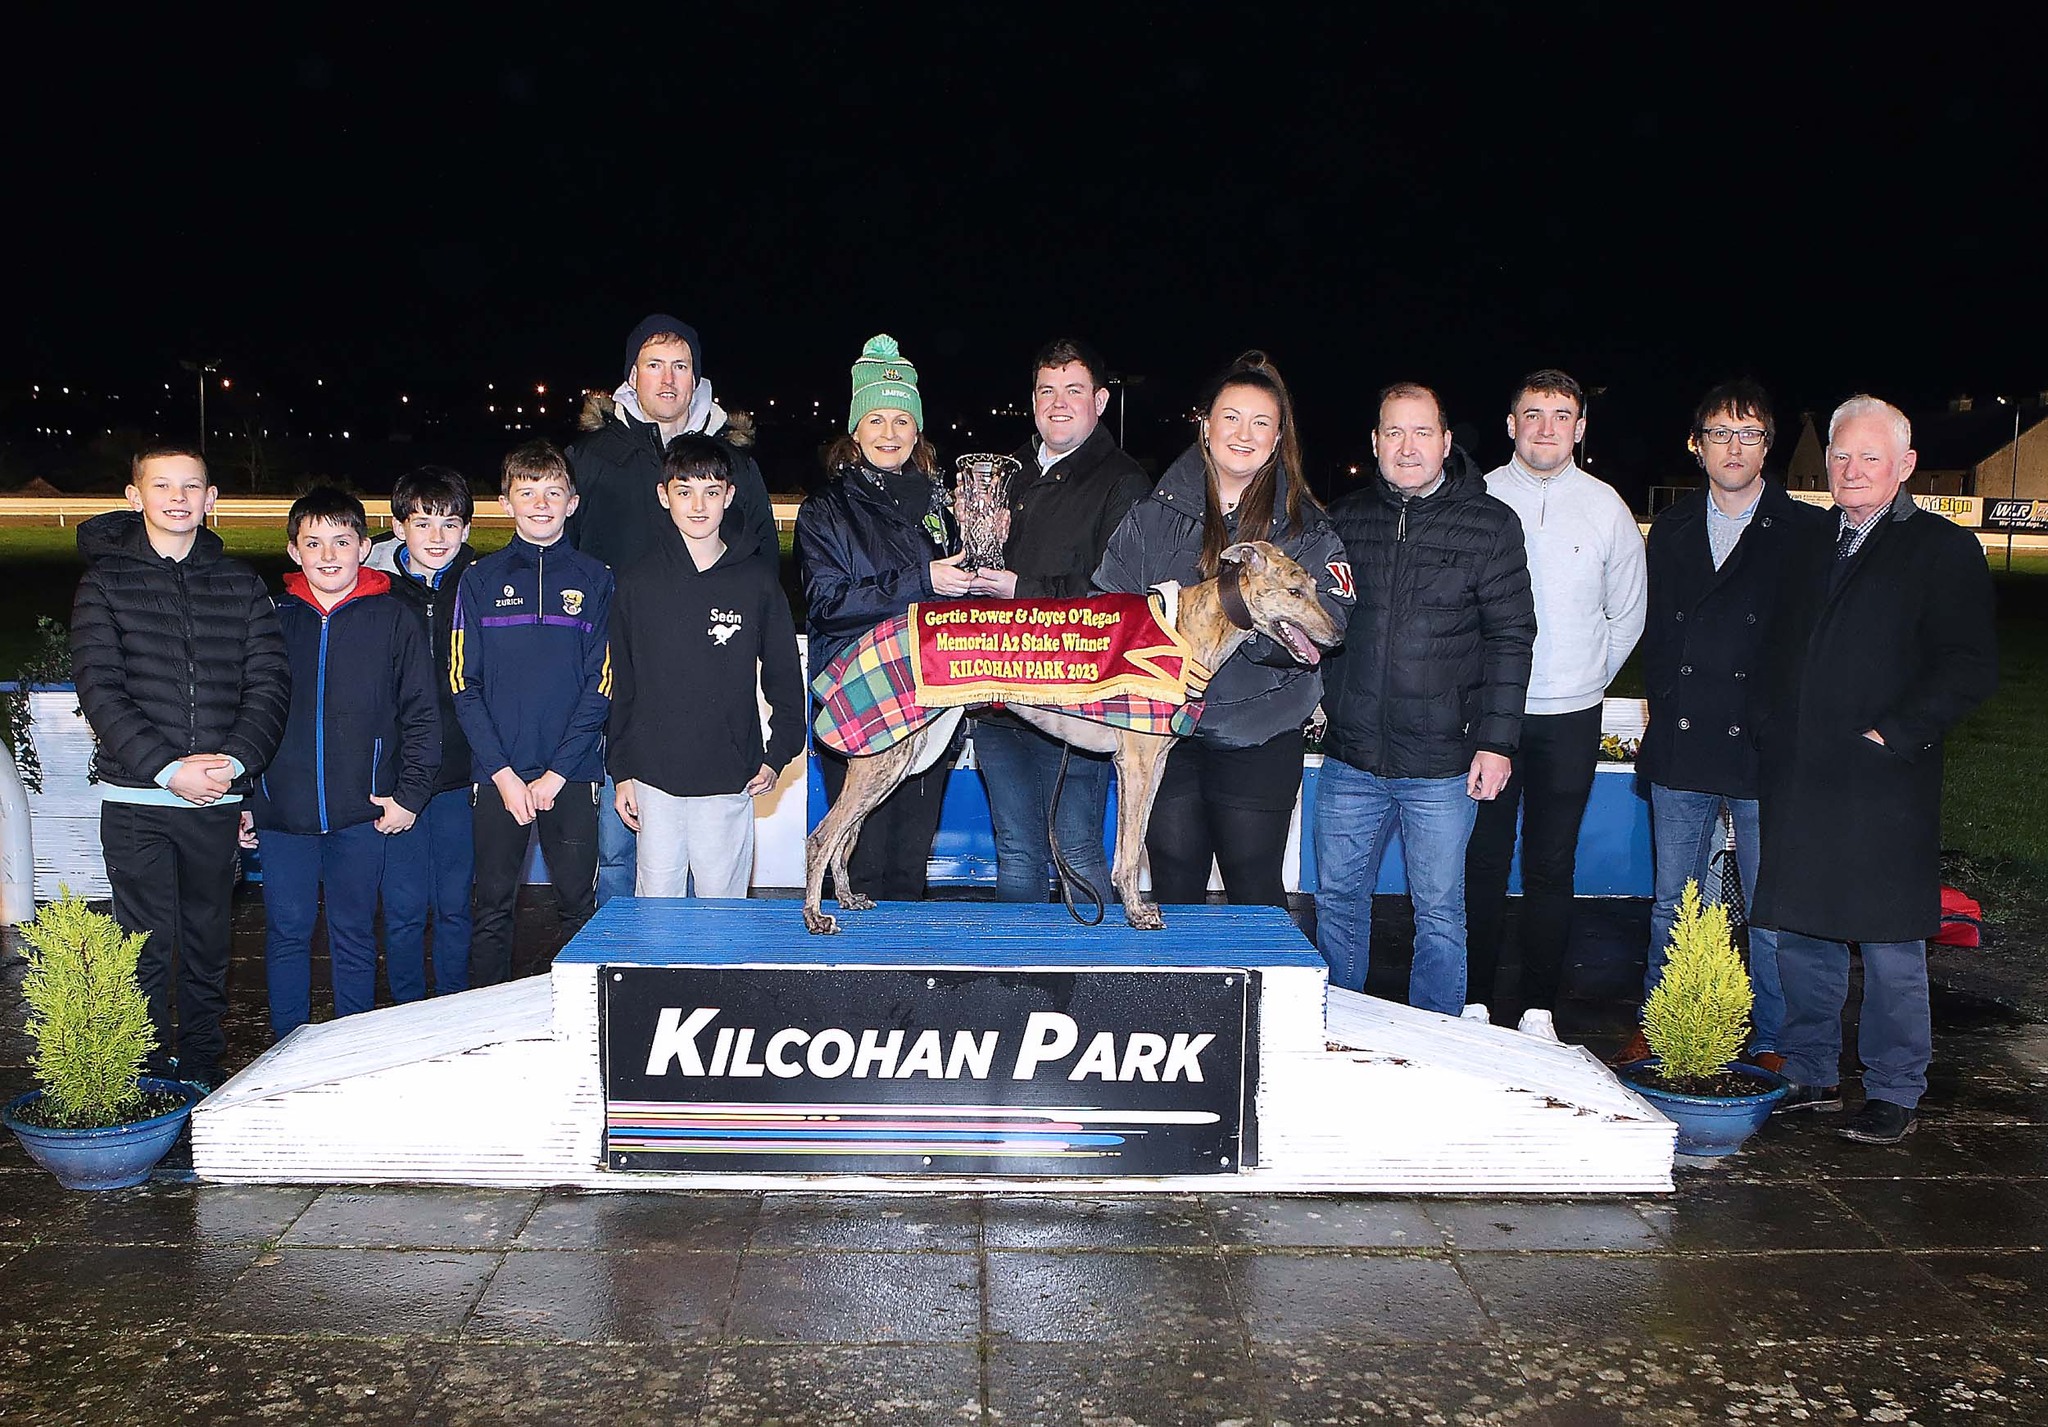 BANBA BRIGHTSIDE came out on top in the final of the €2,550 to the winner of the Gertie Power & Joyce O'Regan Memorial A2 Stake at Kilcohan Park on Saturday night.